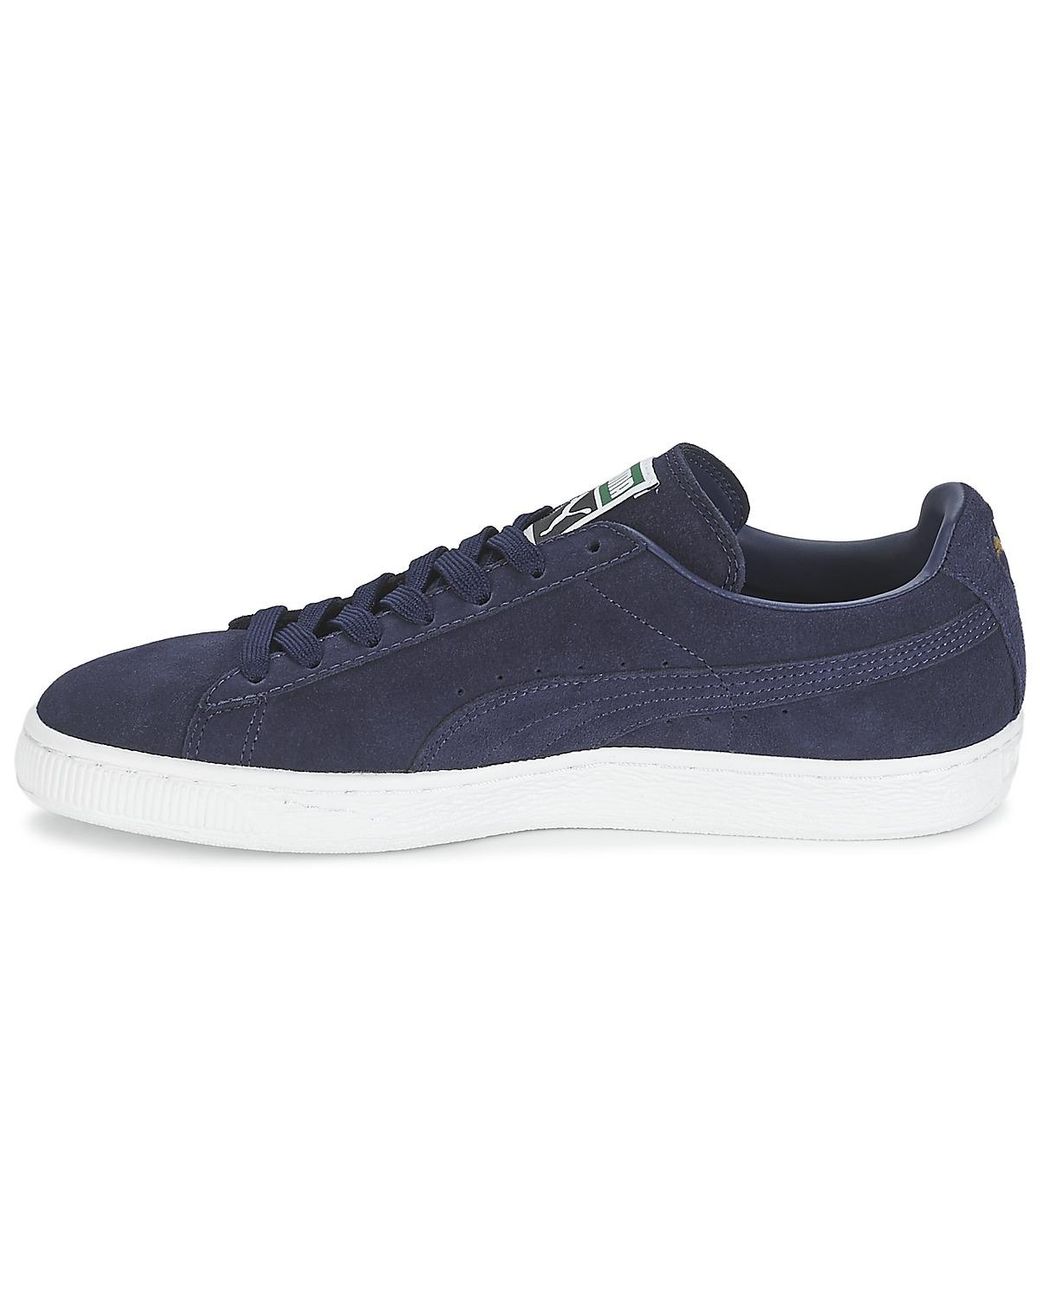 PUMA Suede Classic + Shoes (trainers) in Navy (Blue) - Save 59% - Lyst